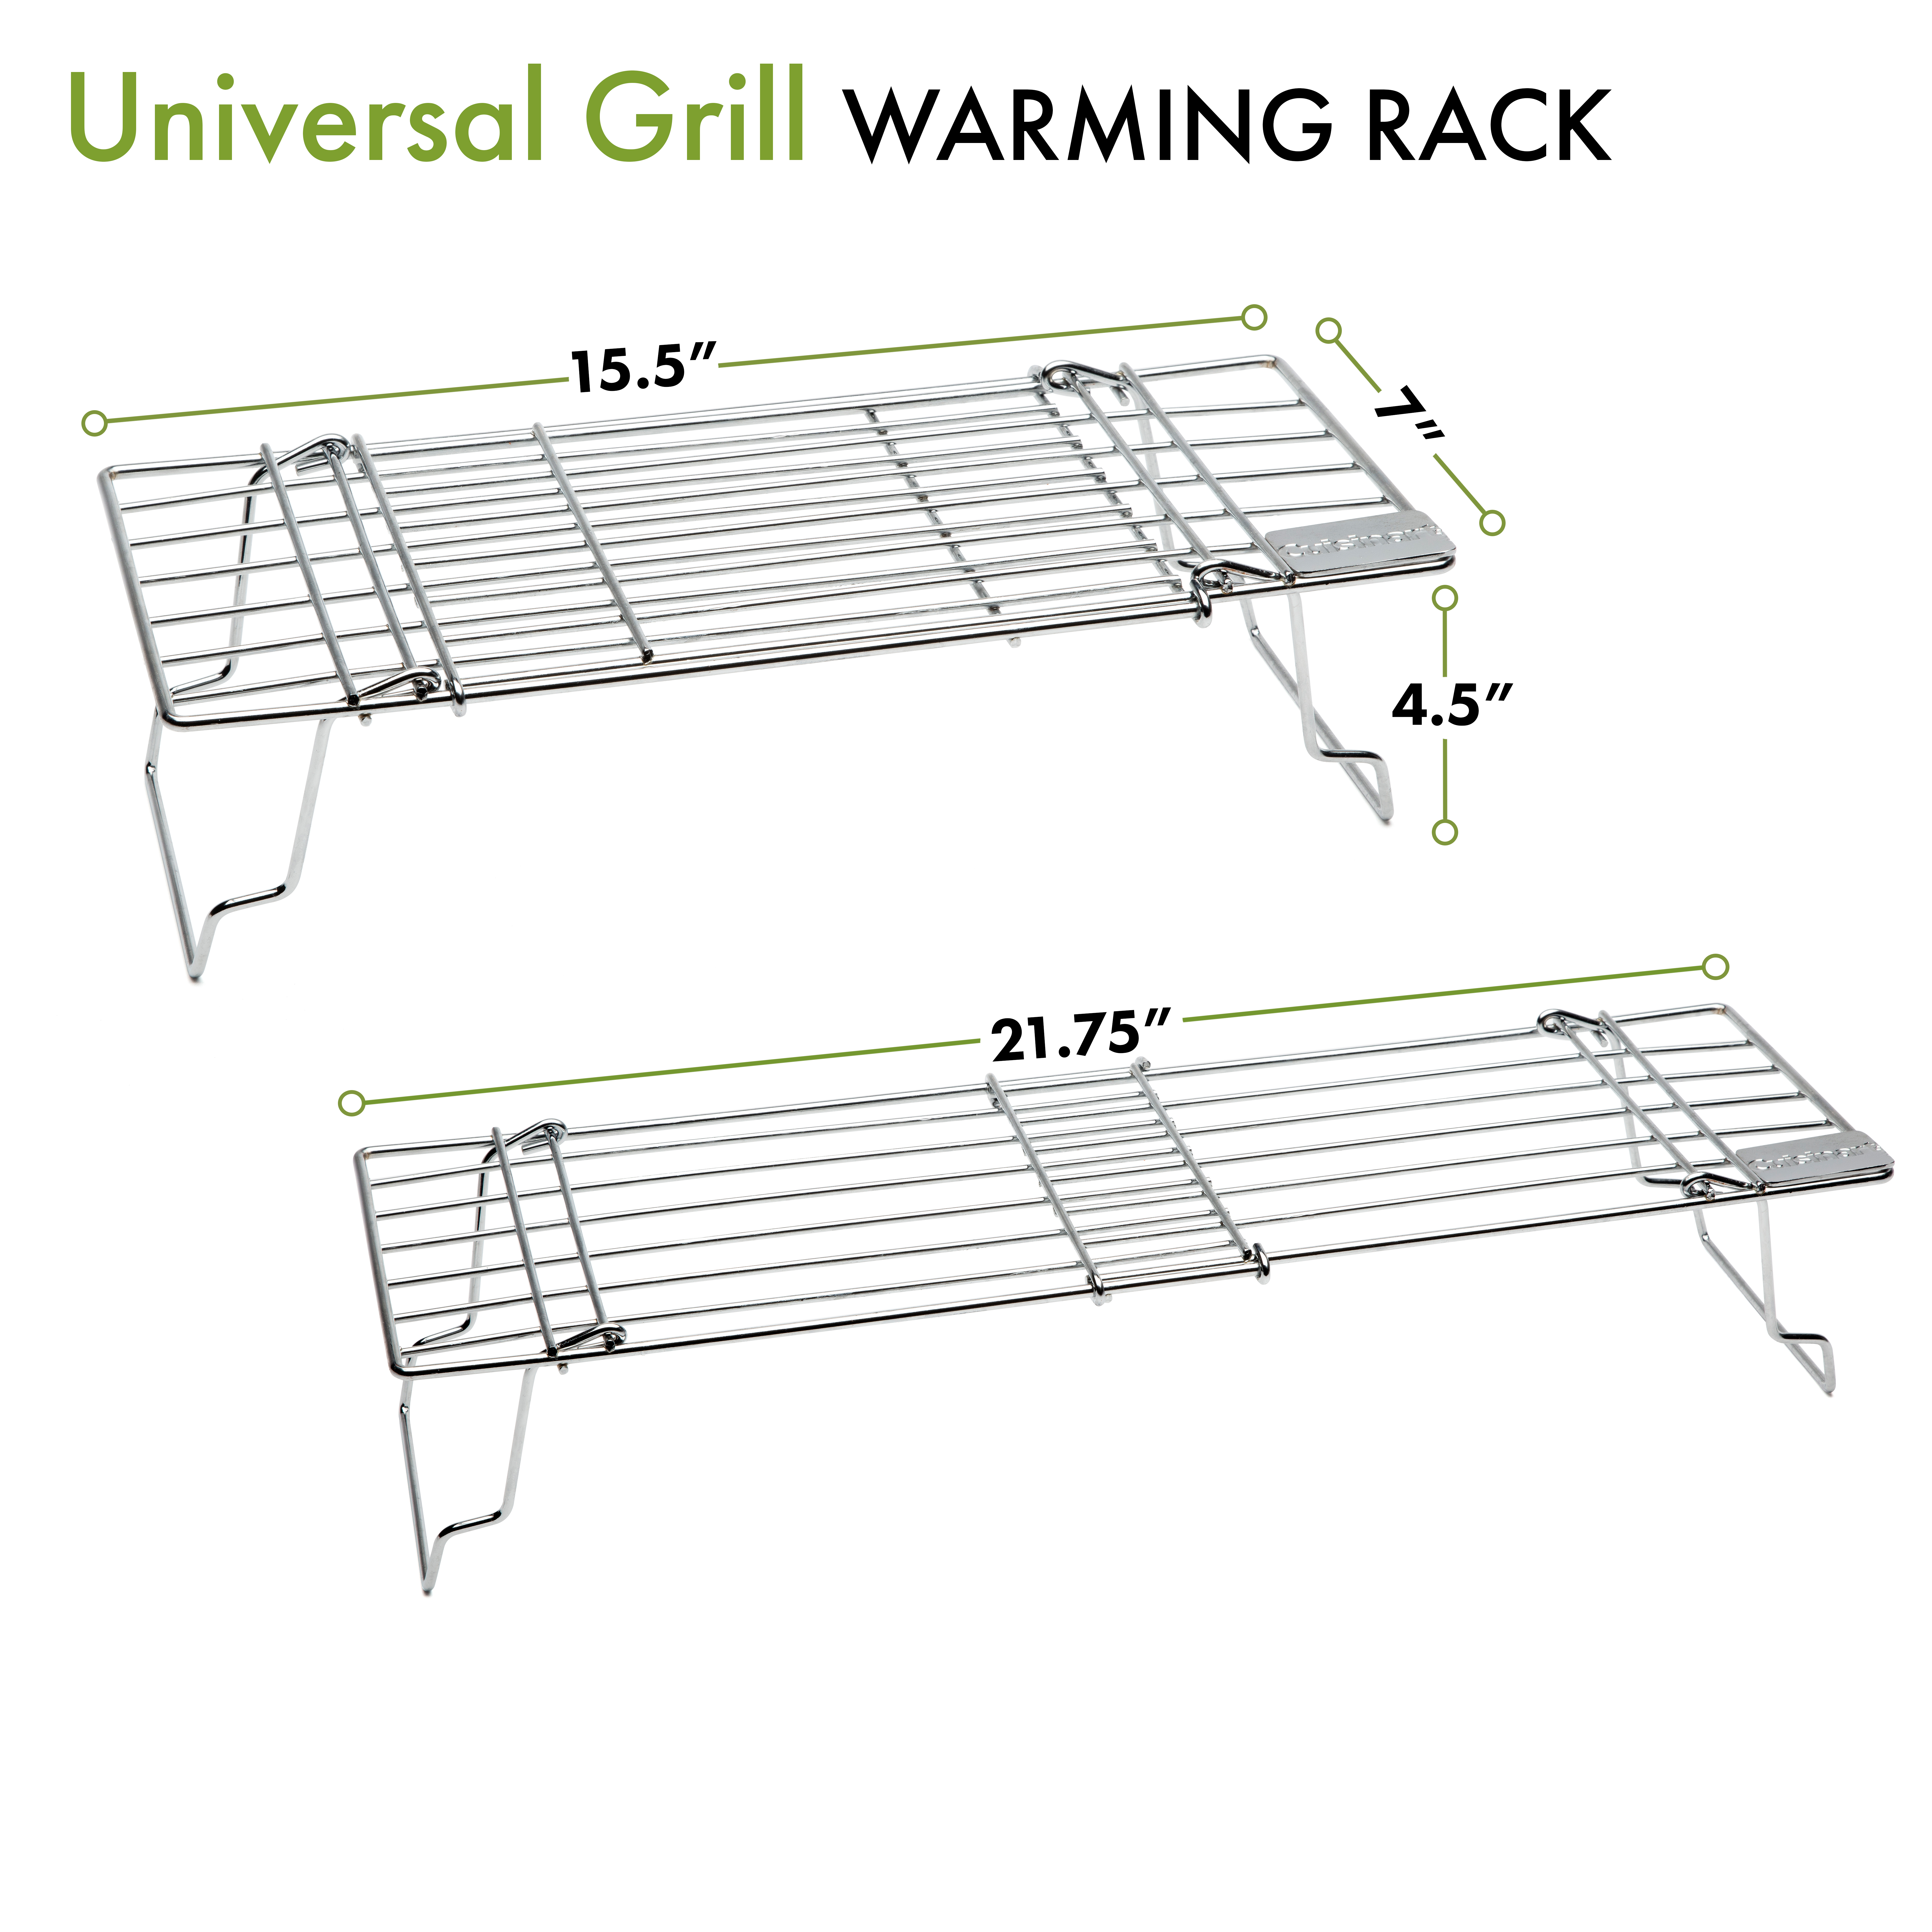 Cuisinart Universal Grill Warming Rack - Extends from 15.5" to 21.75" - image 5 of 5